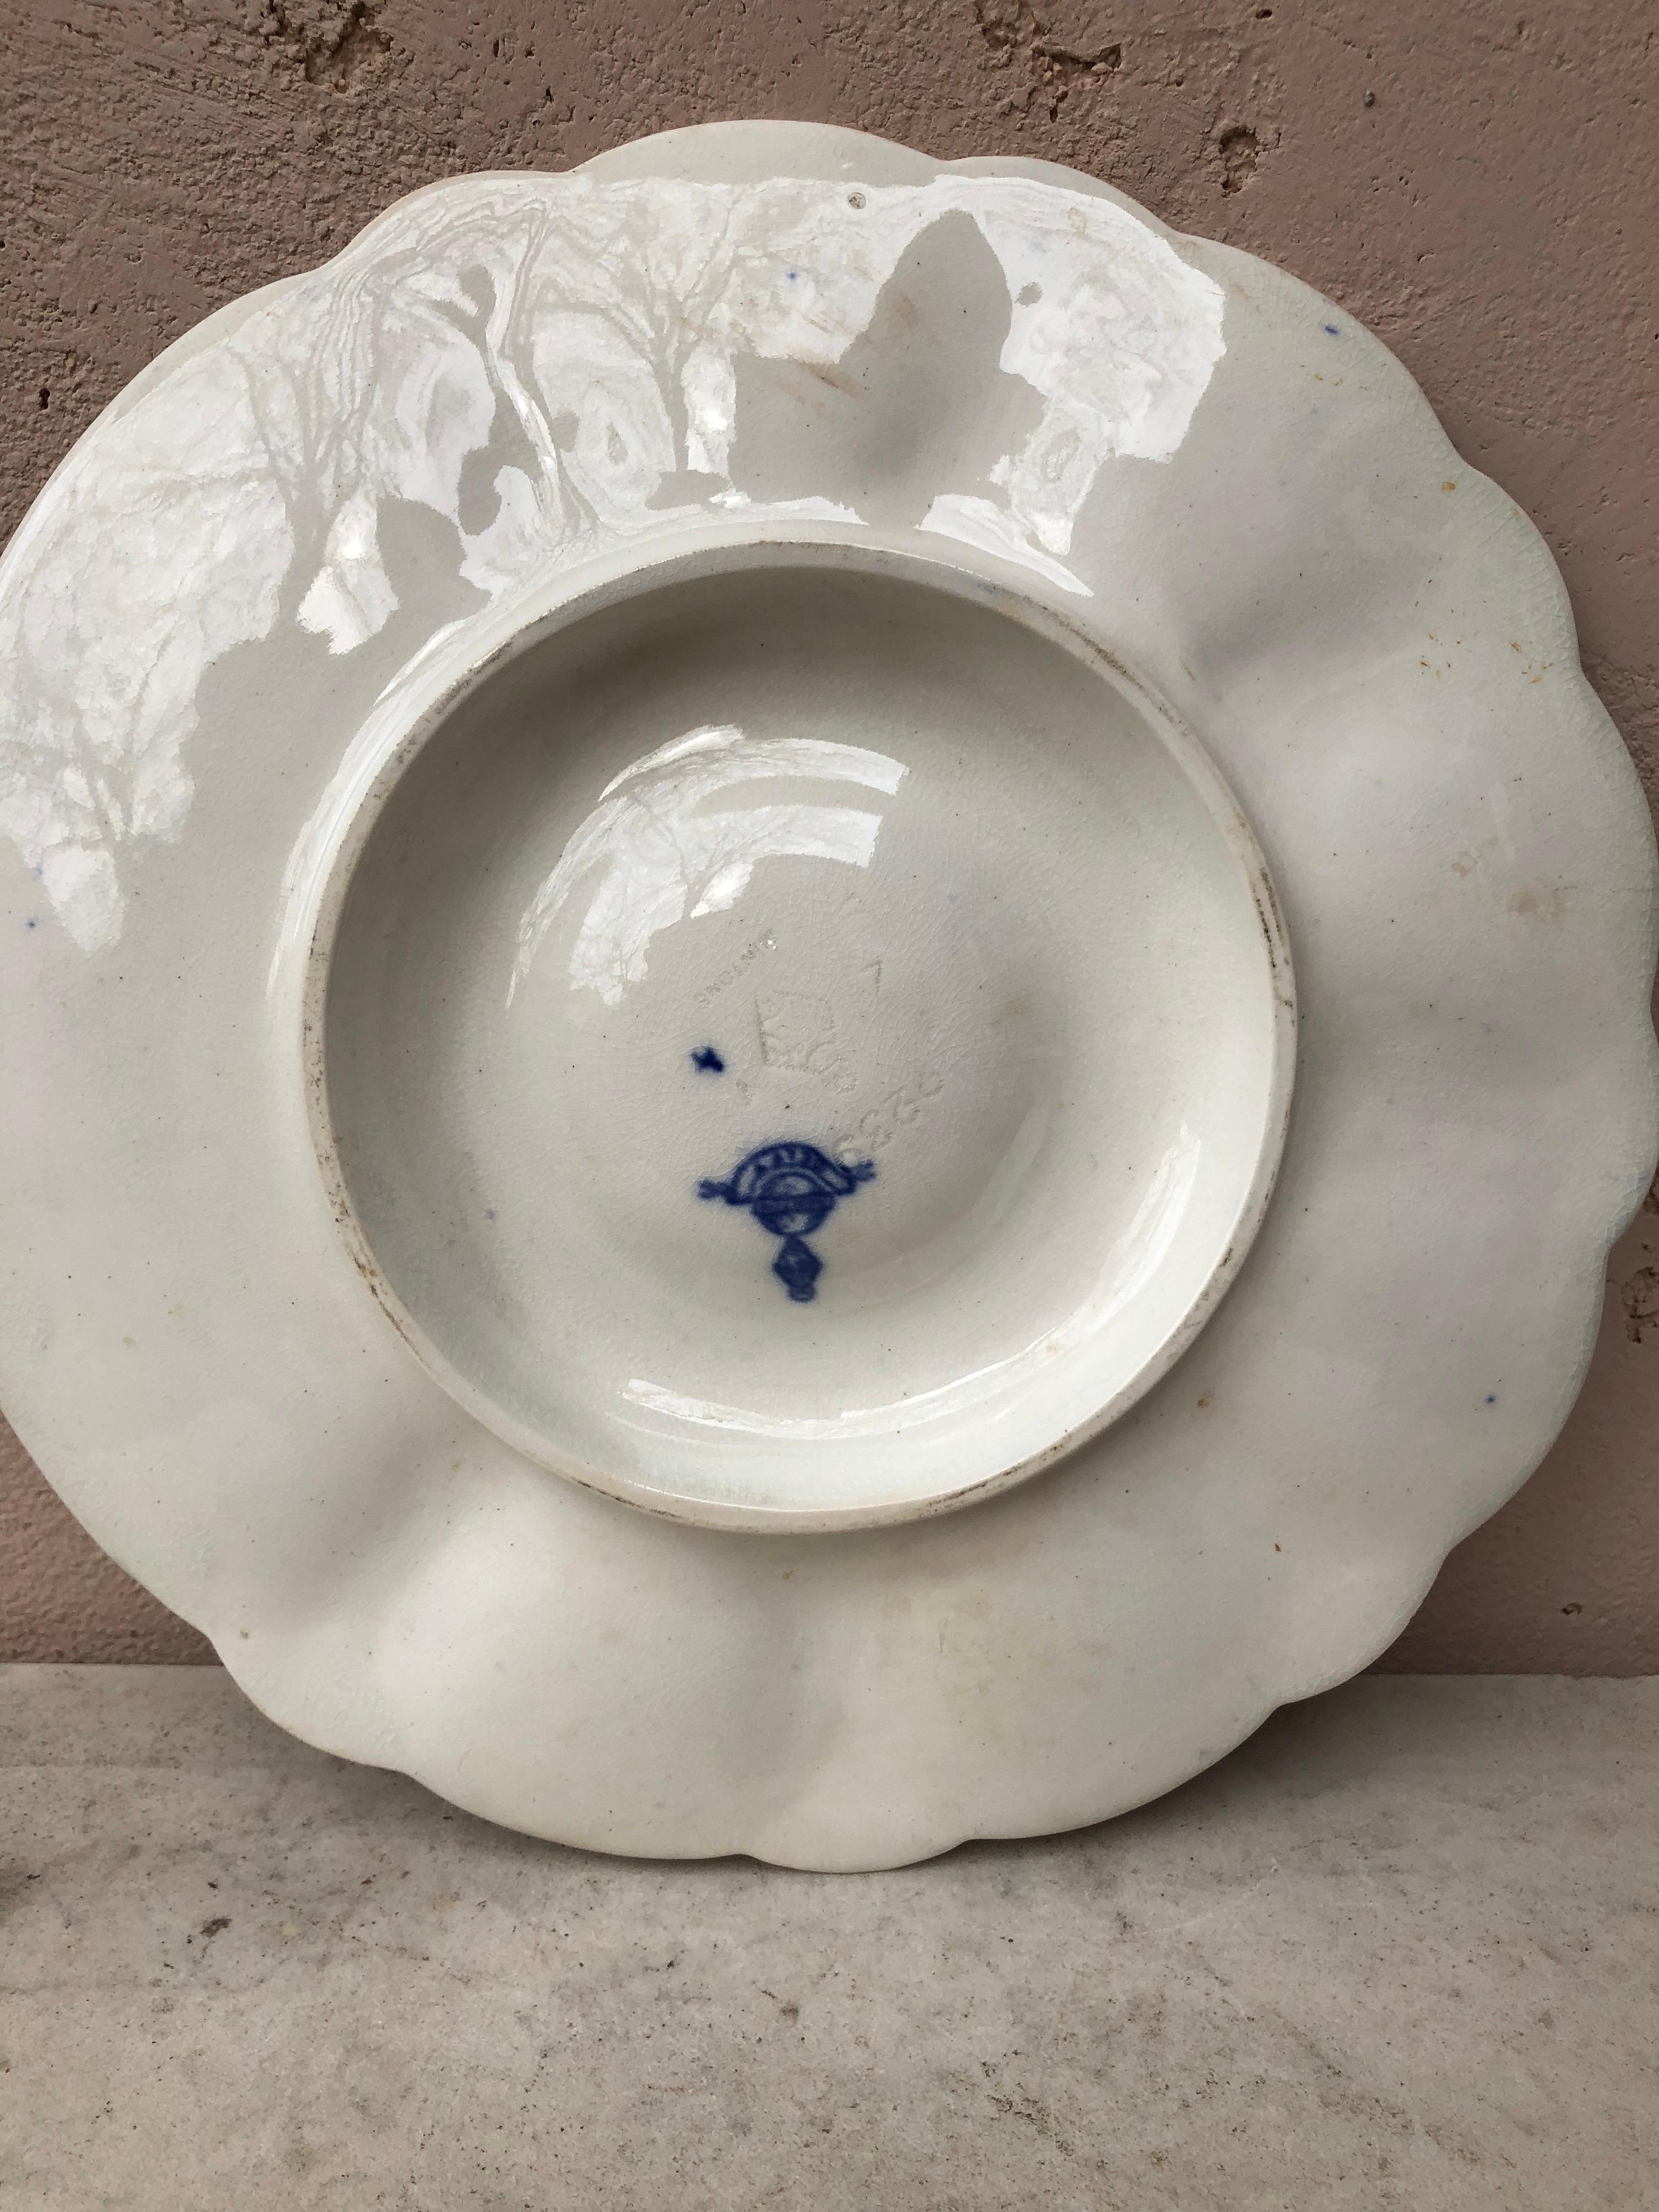 Late 19th Century 19th Century Minton's China Delft Blue and White Oyster Plate